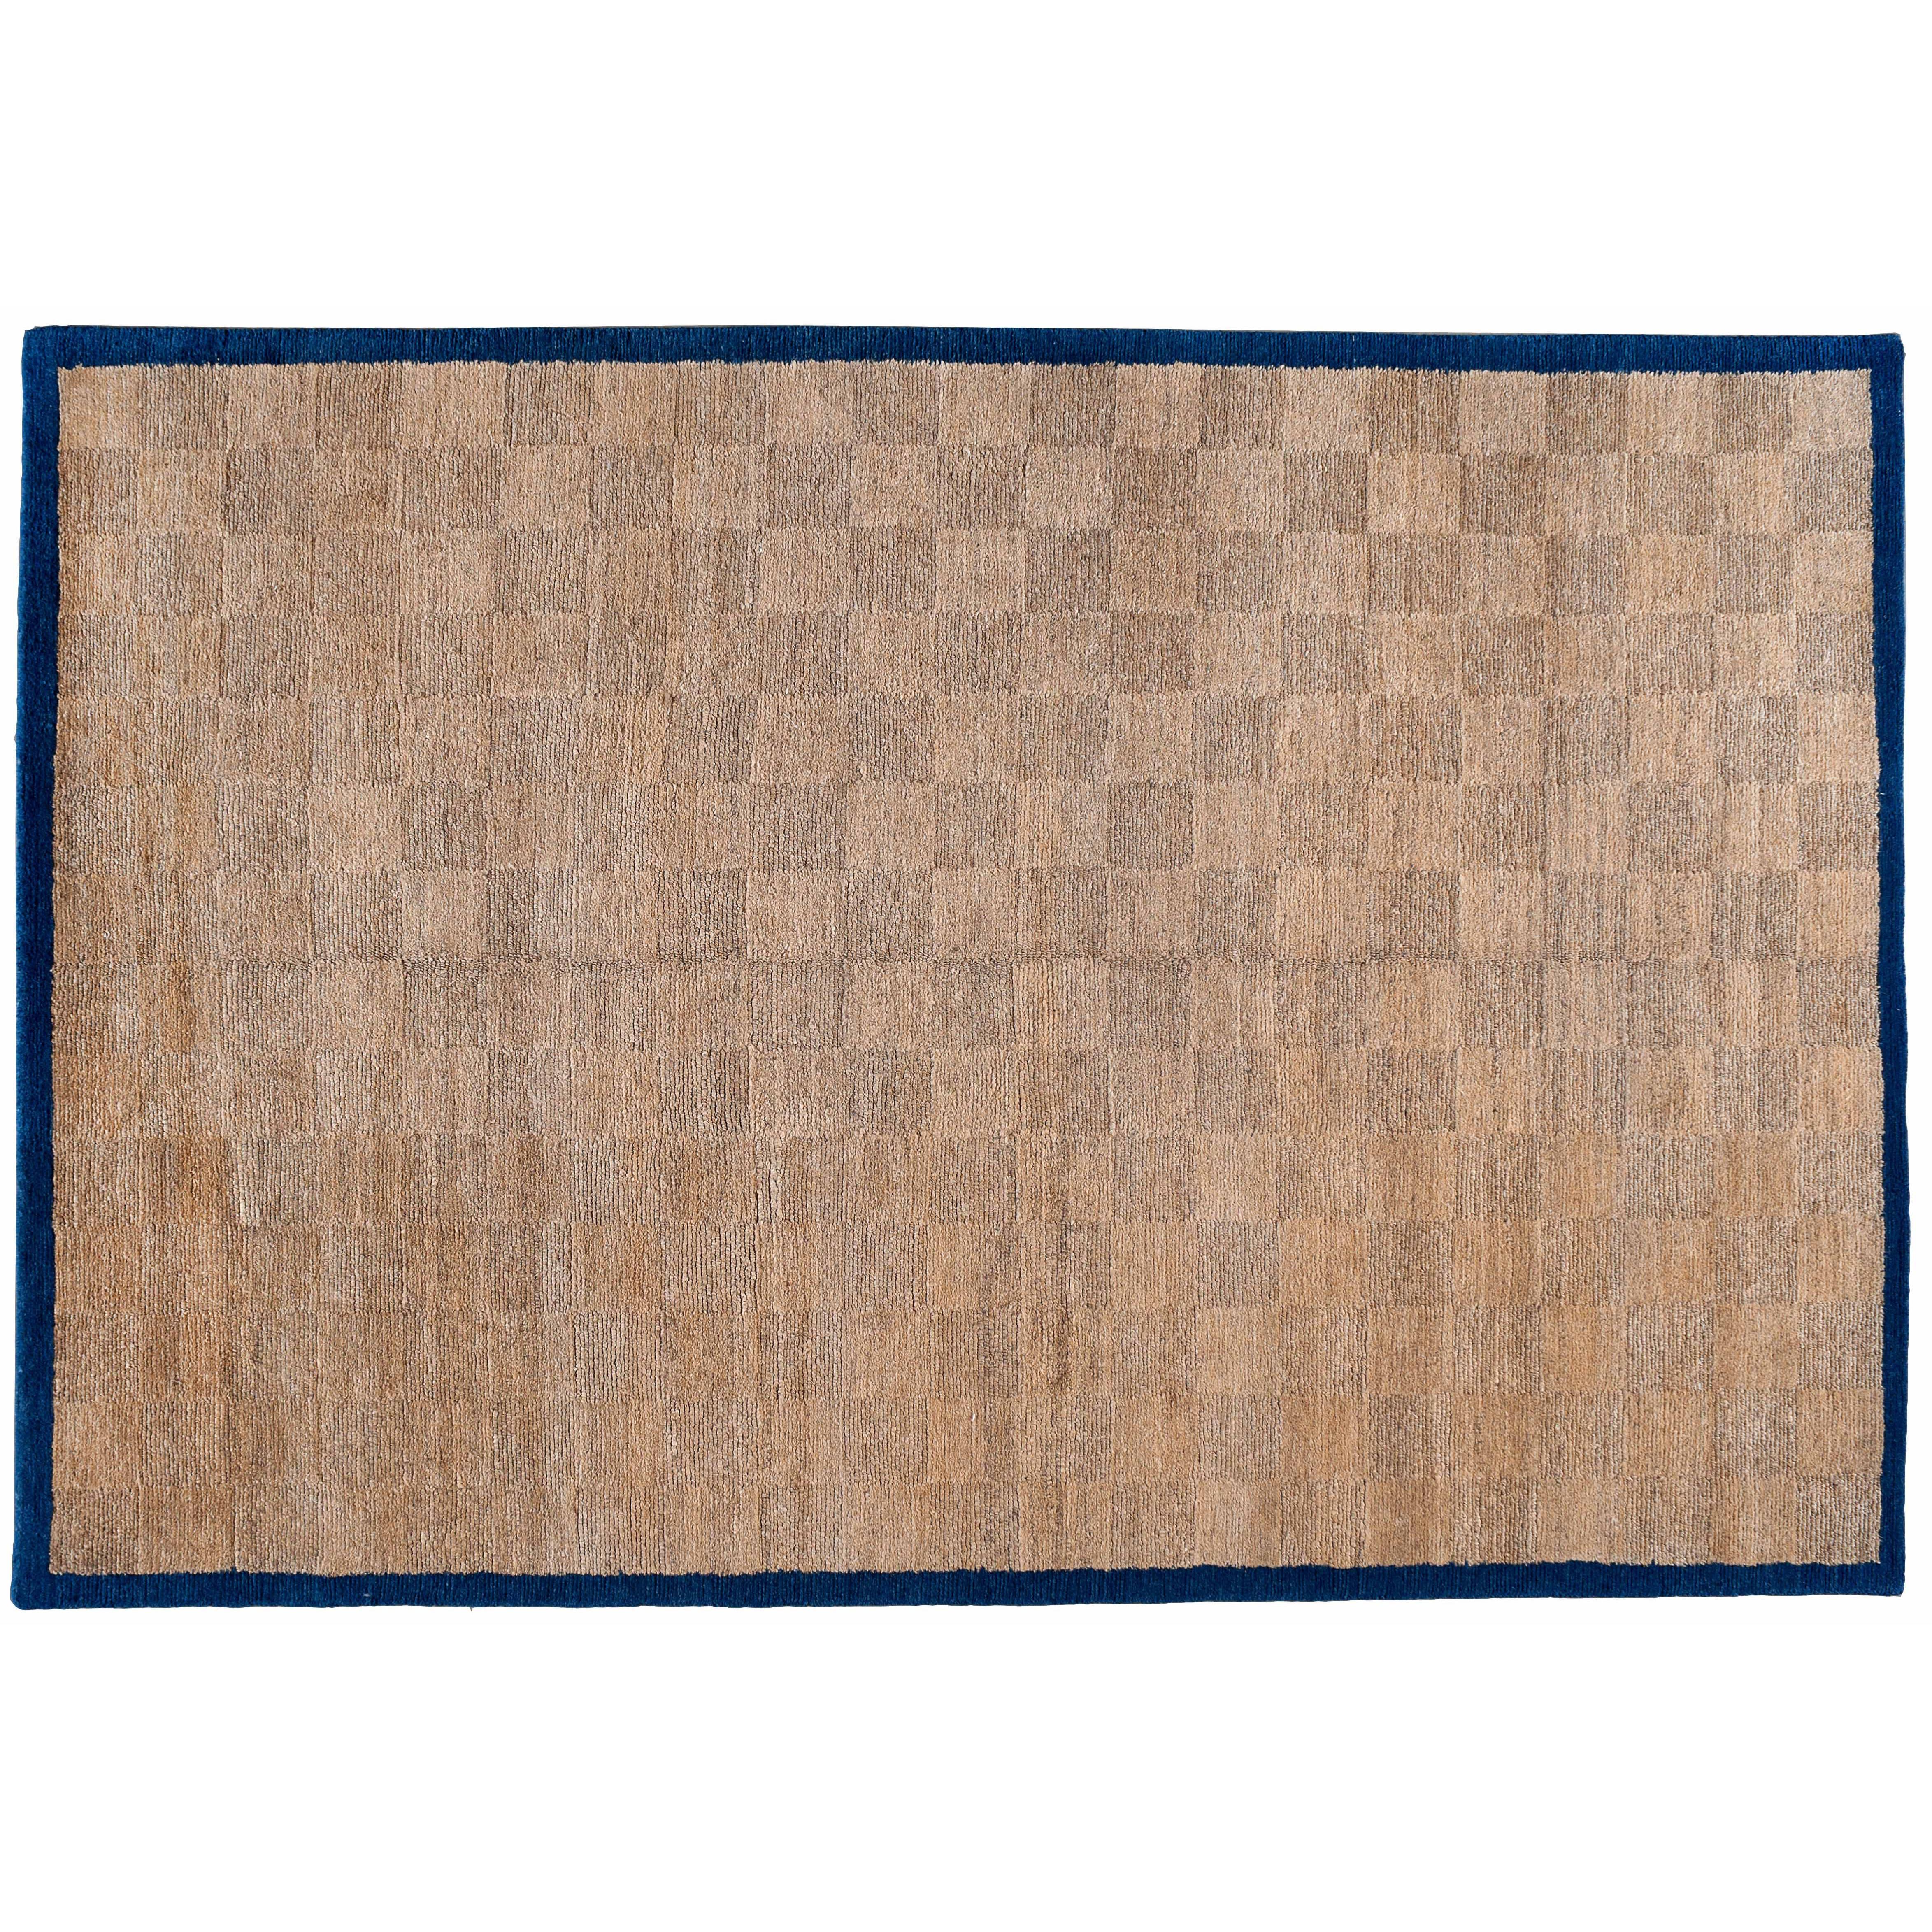 Tone on Tone Checkered Rug with Navy Border For Sale